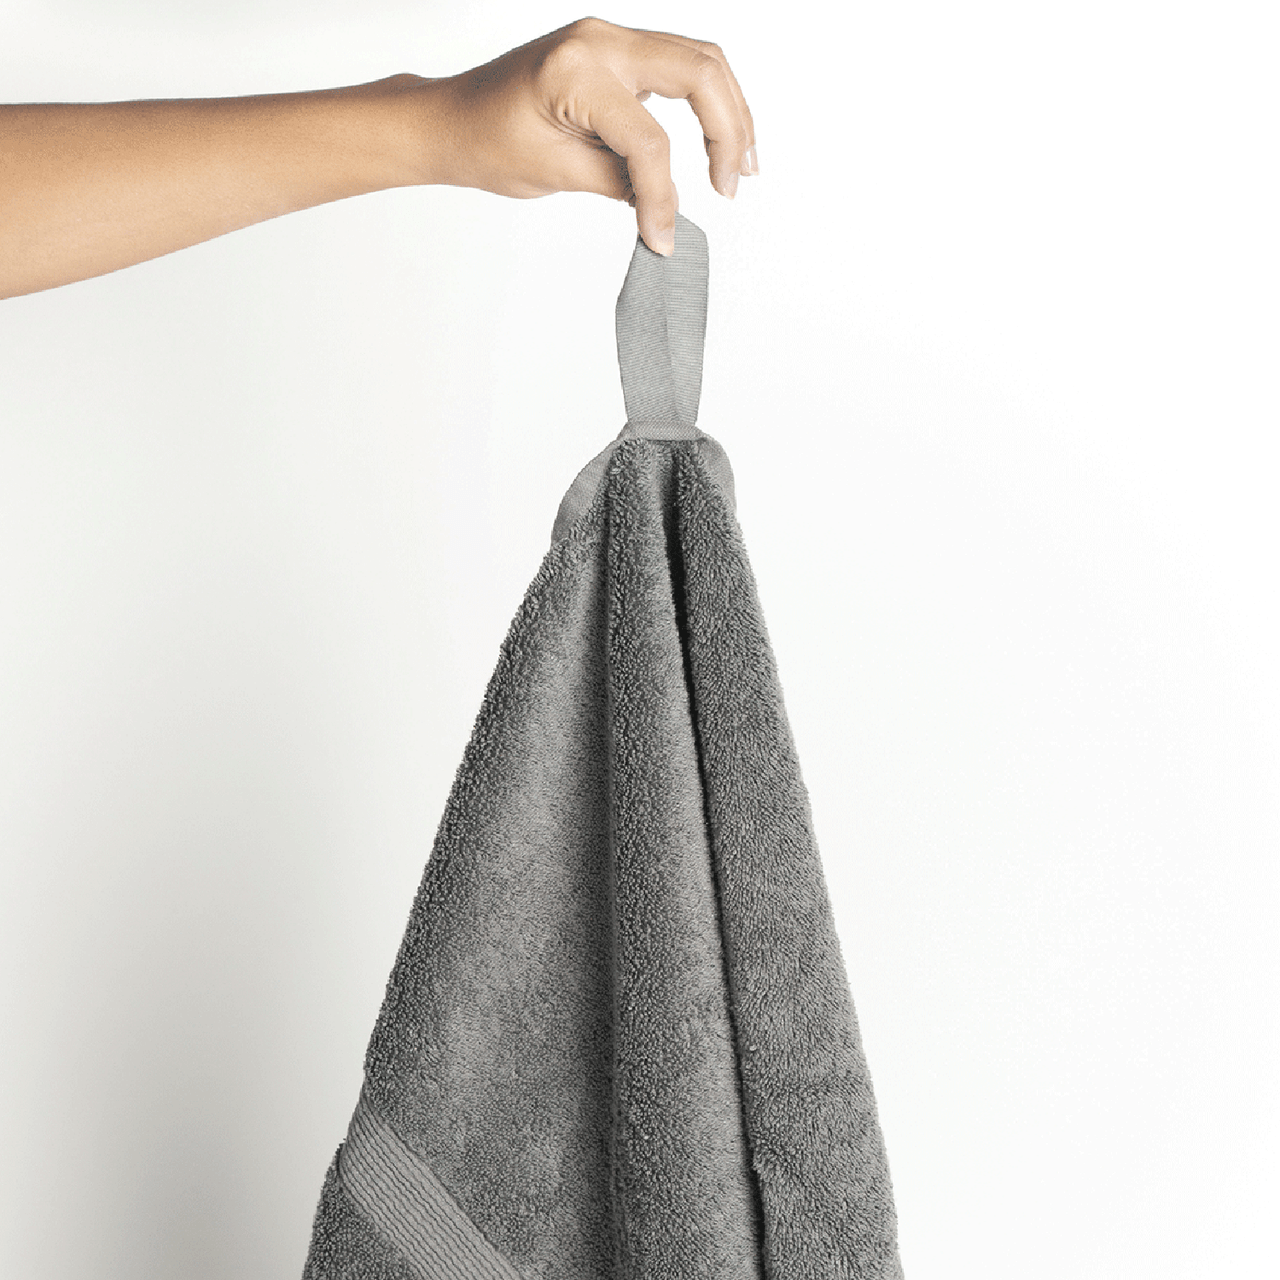 https://cdn11.bigcommerce.com/s-mpfo2gcqca/images/stencil/1280x1280/products/705/3649/nebia-hand_towel-gray-hanging-hand__88836.1688576477.png?c=1